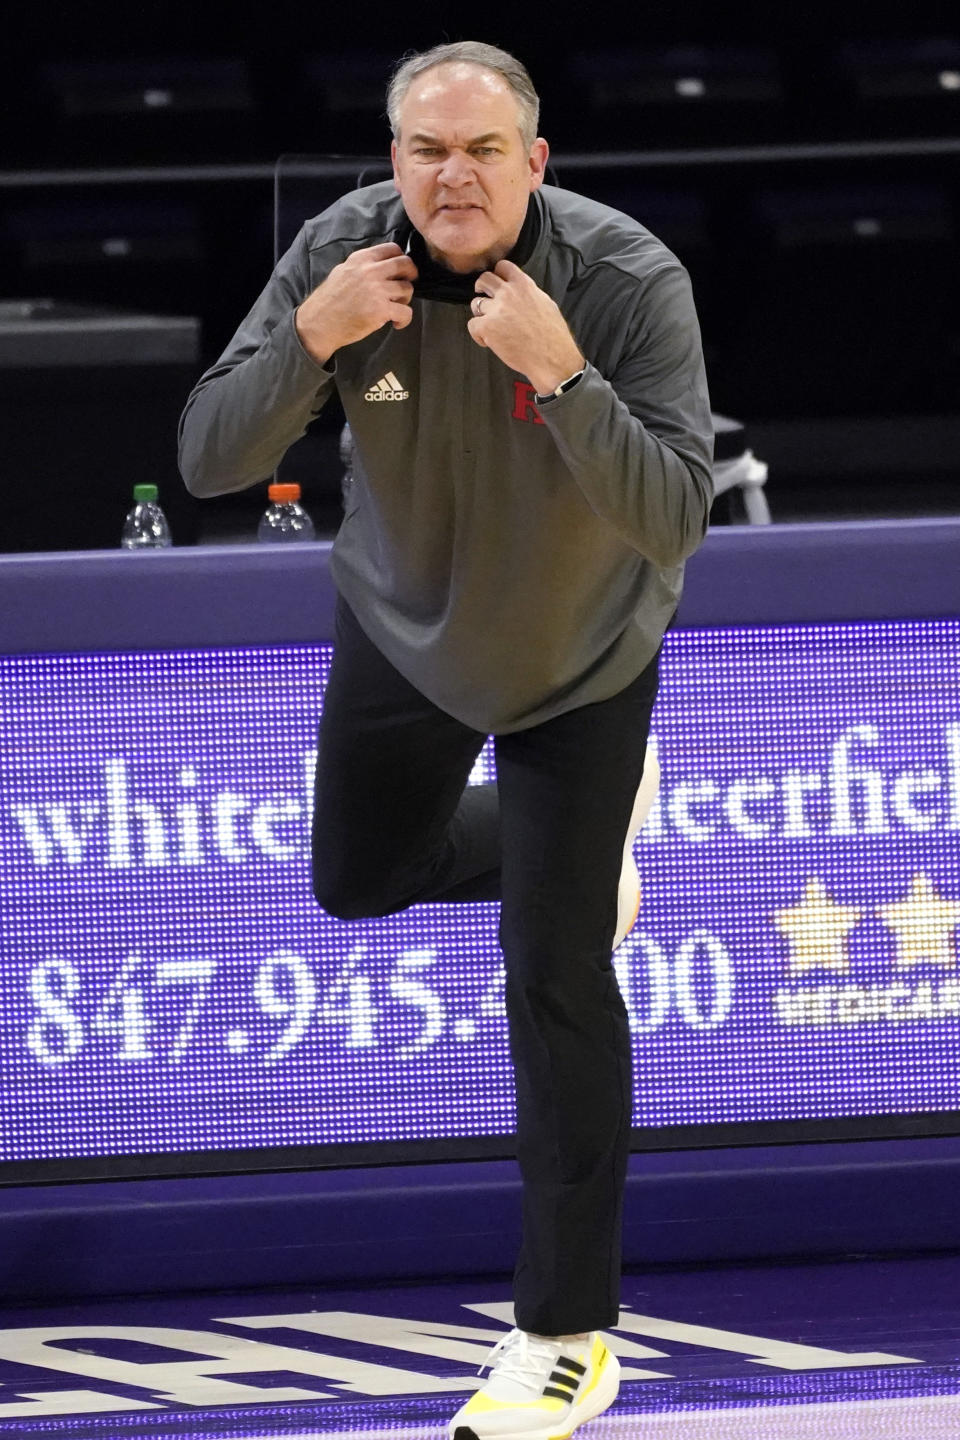 Rutgers head coach Steve Pikiell watches his team during the first half of an NCAA college basketball game against Northwestern in Evanston, Ill., Sunday, Jan. 31, 2021. (AP Photo/Nam Y. Huh)